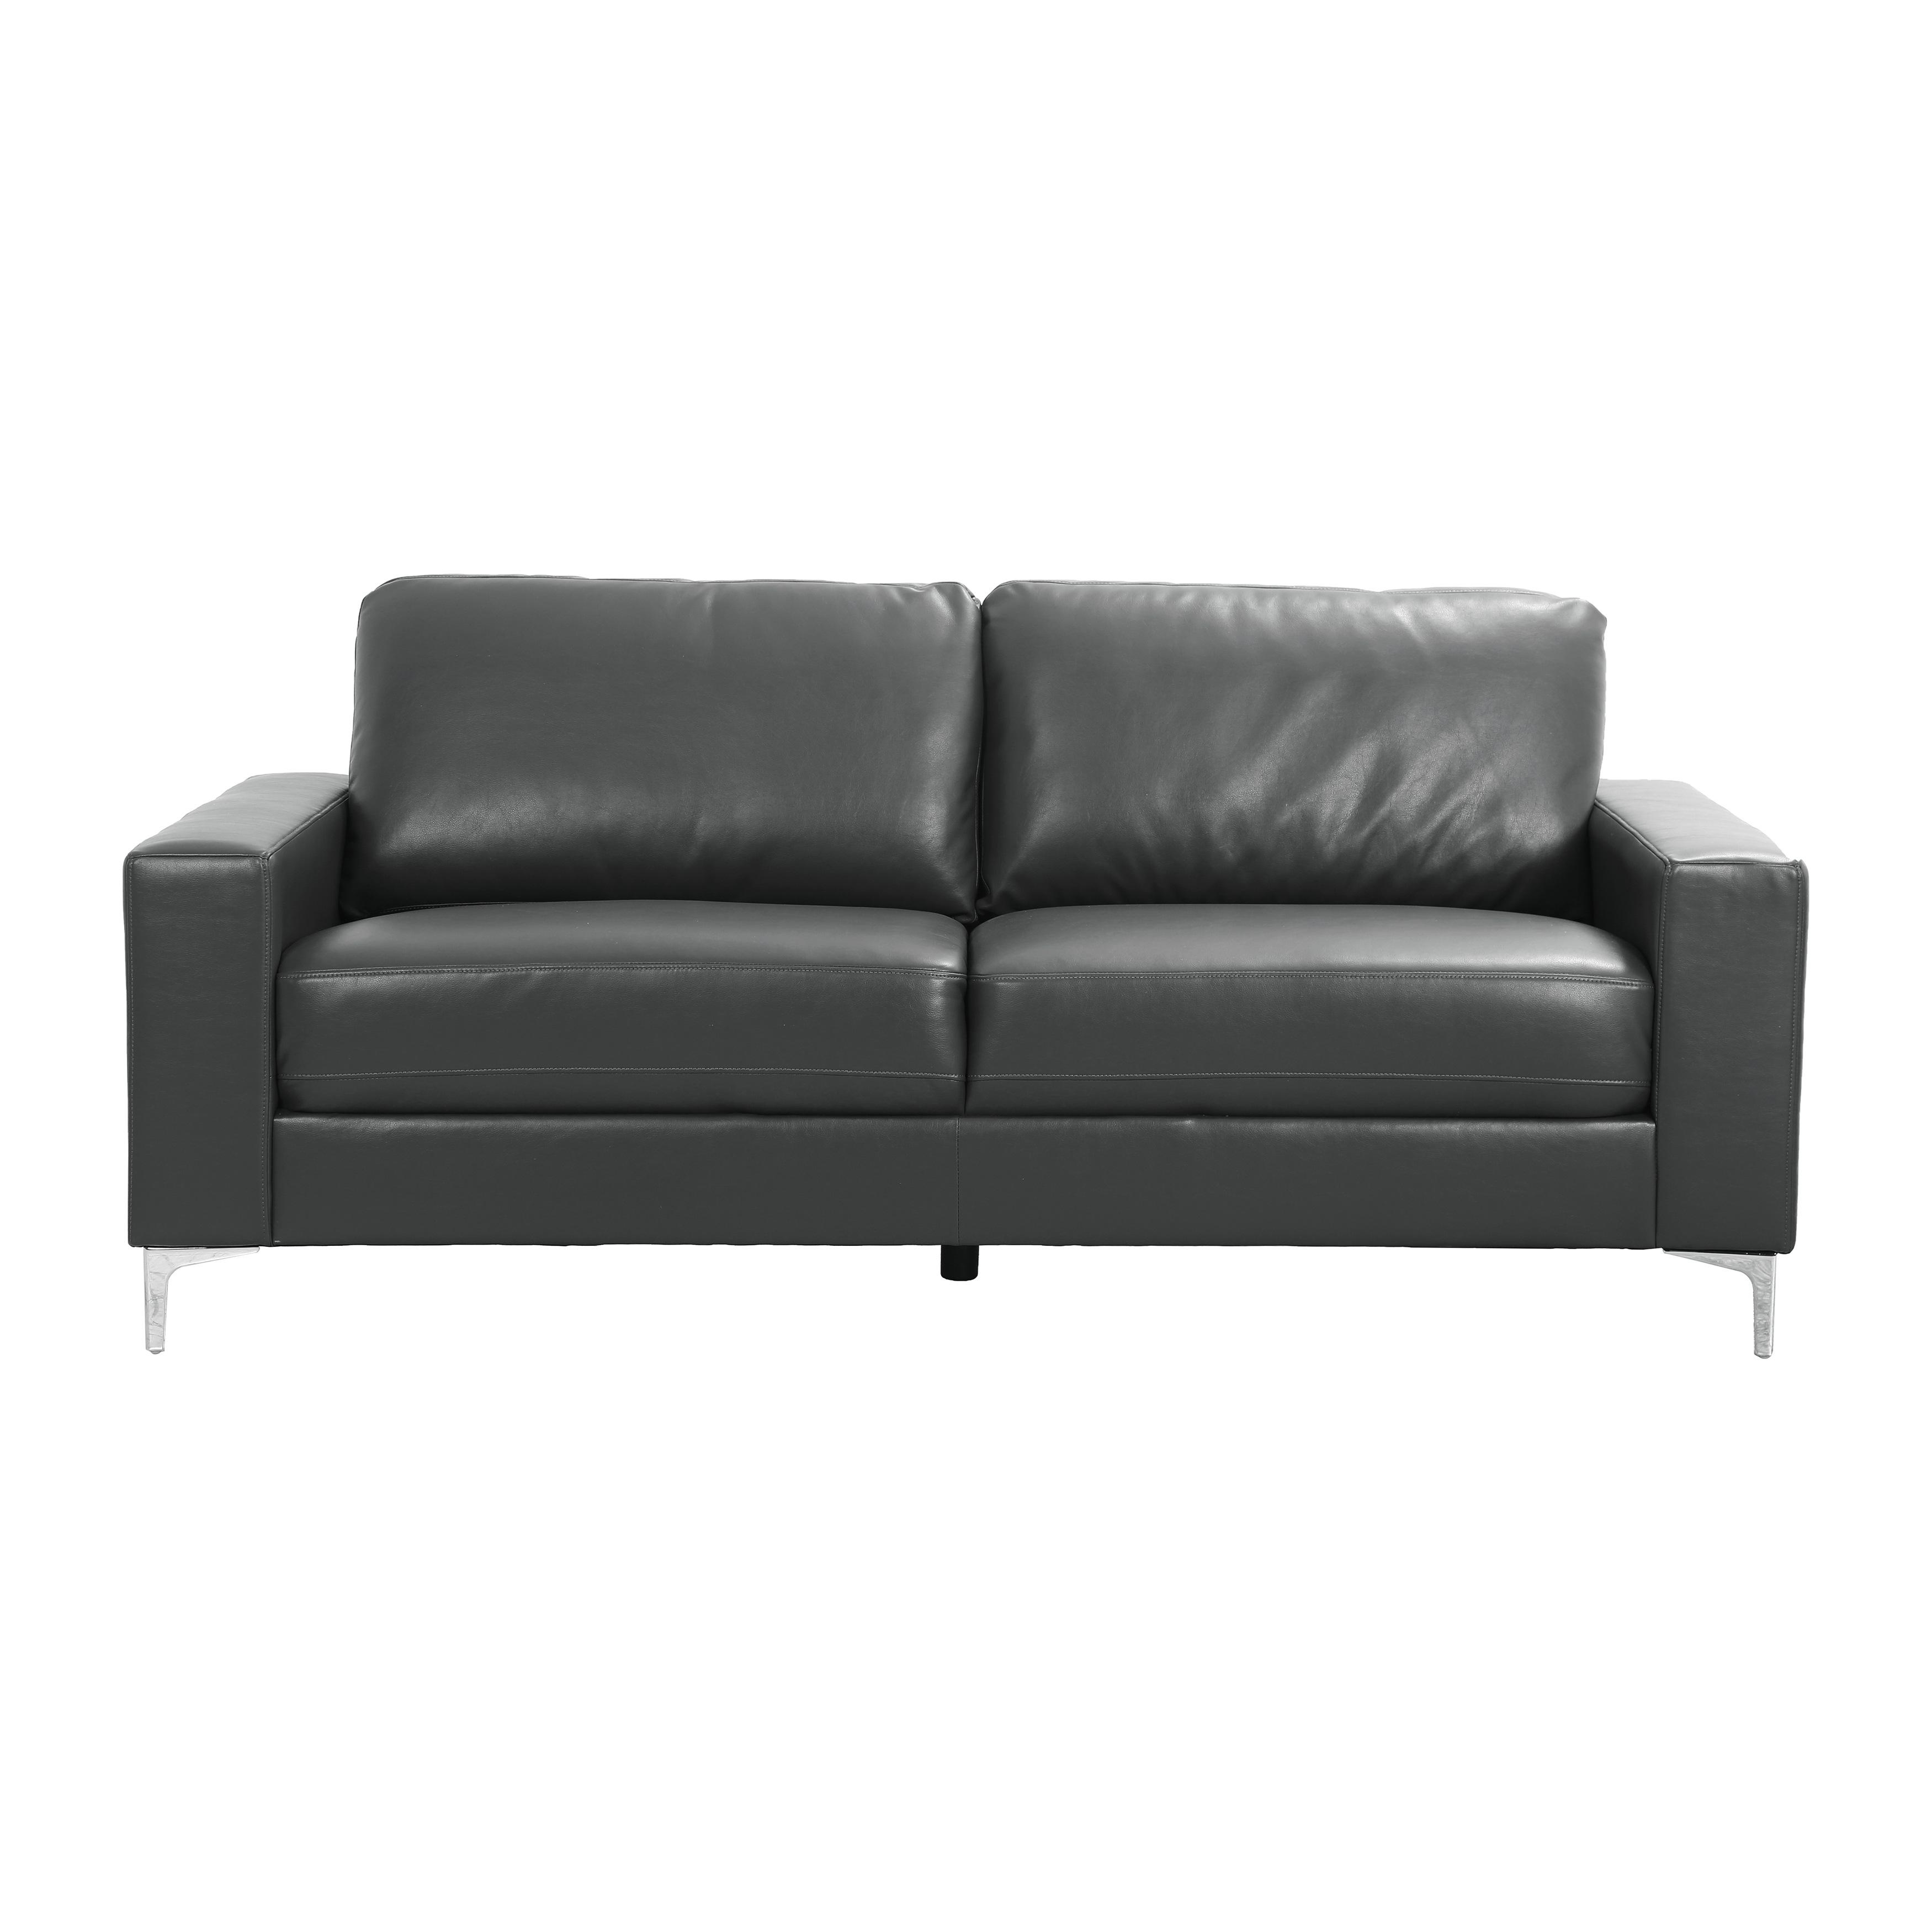 Contemporary Sofa 8203GY-3 Iniko 8203GY-3 in Gray Faux Leather